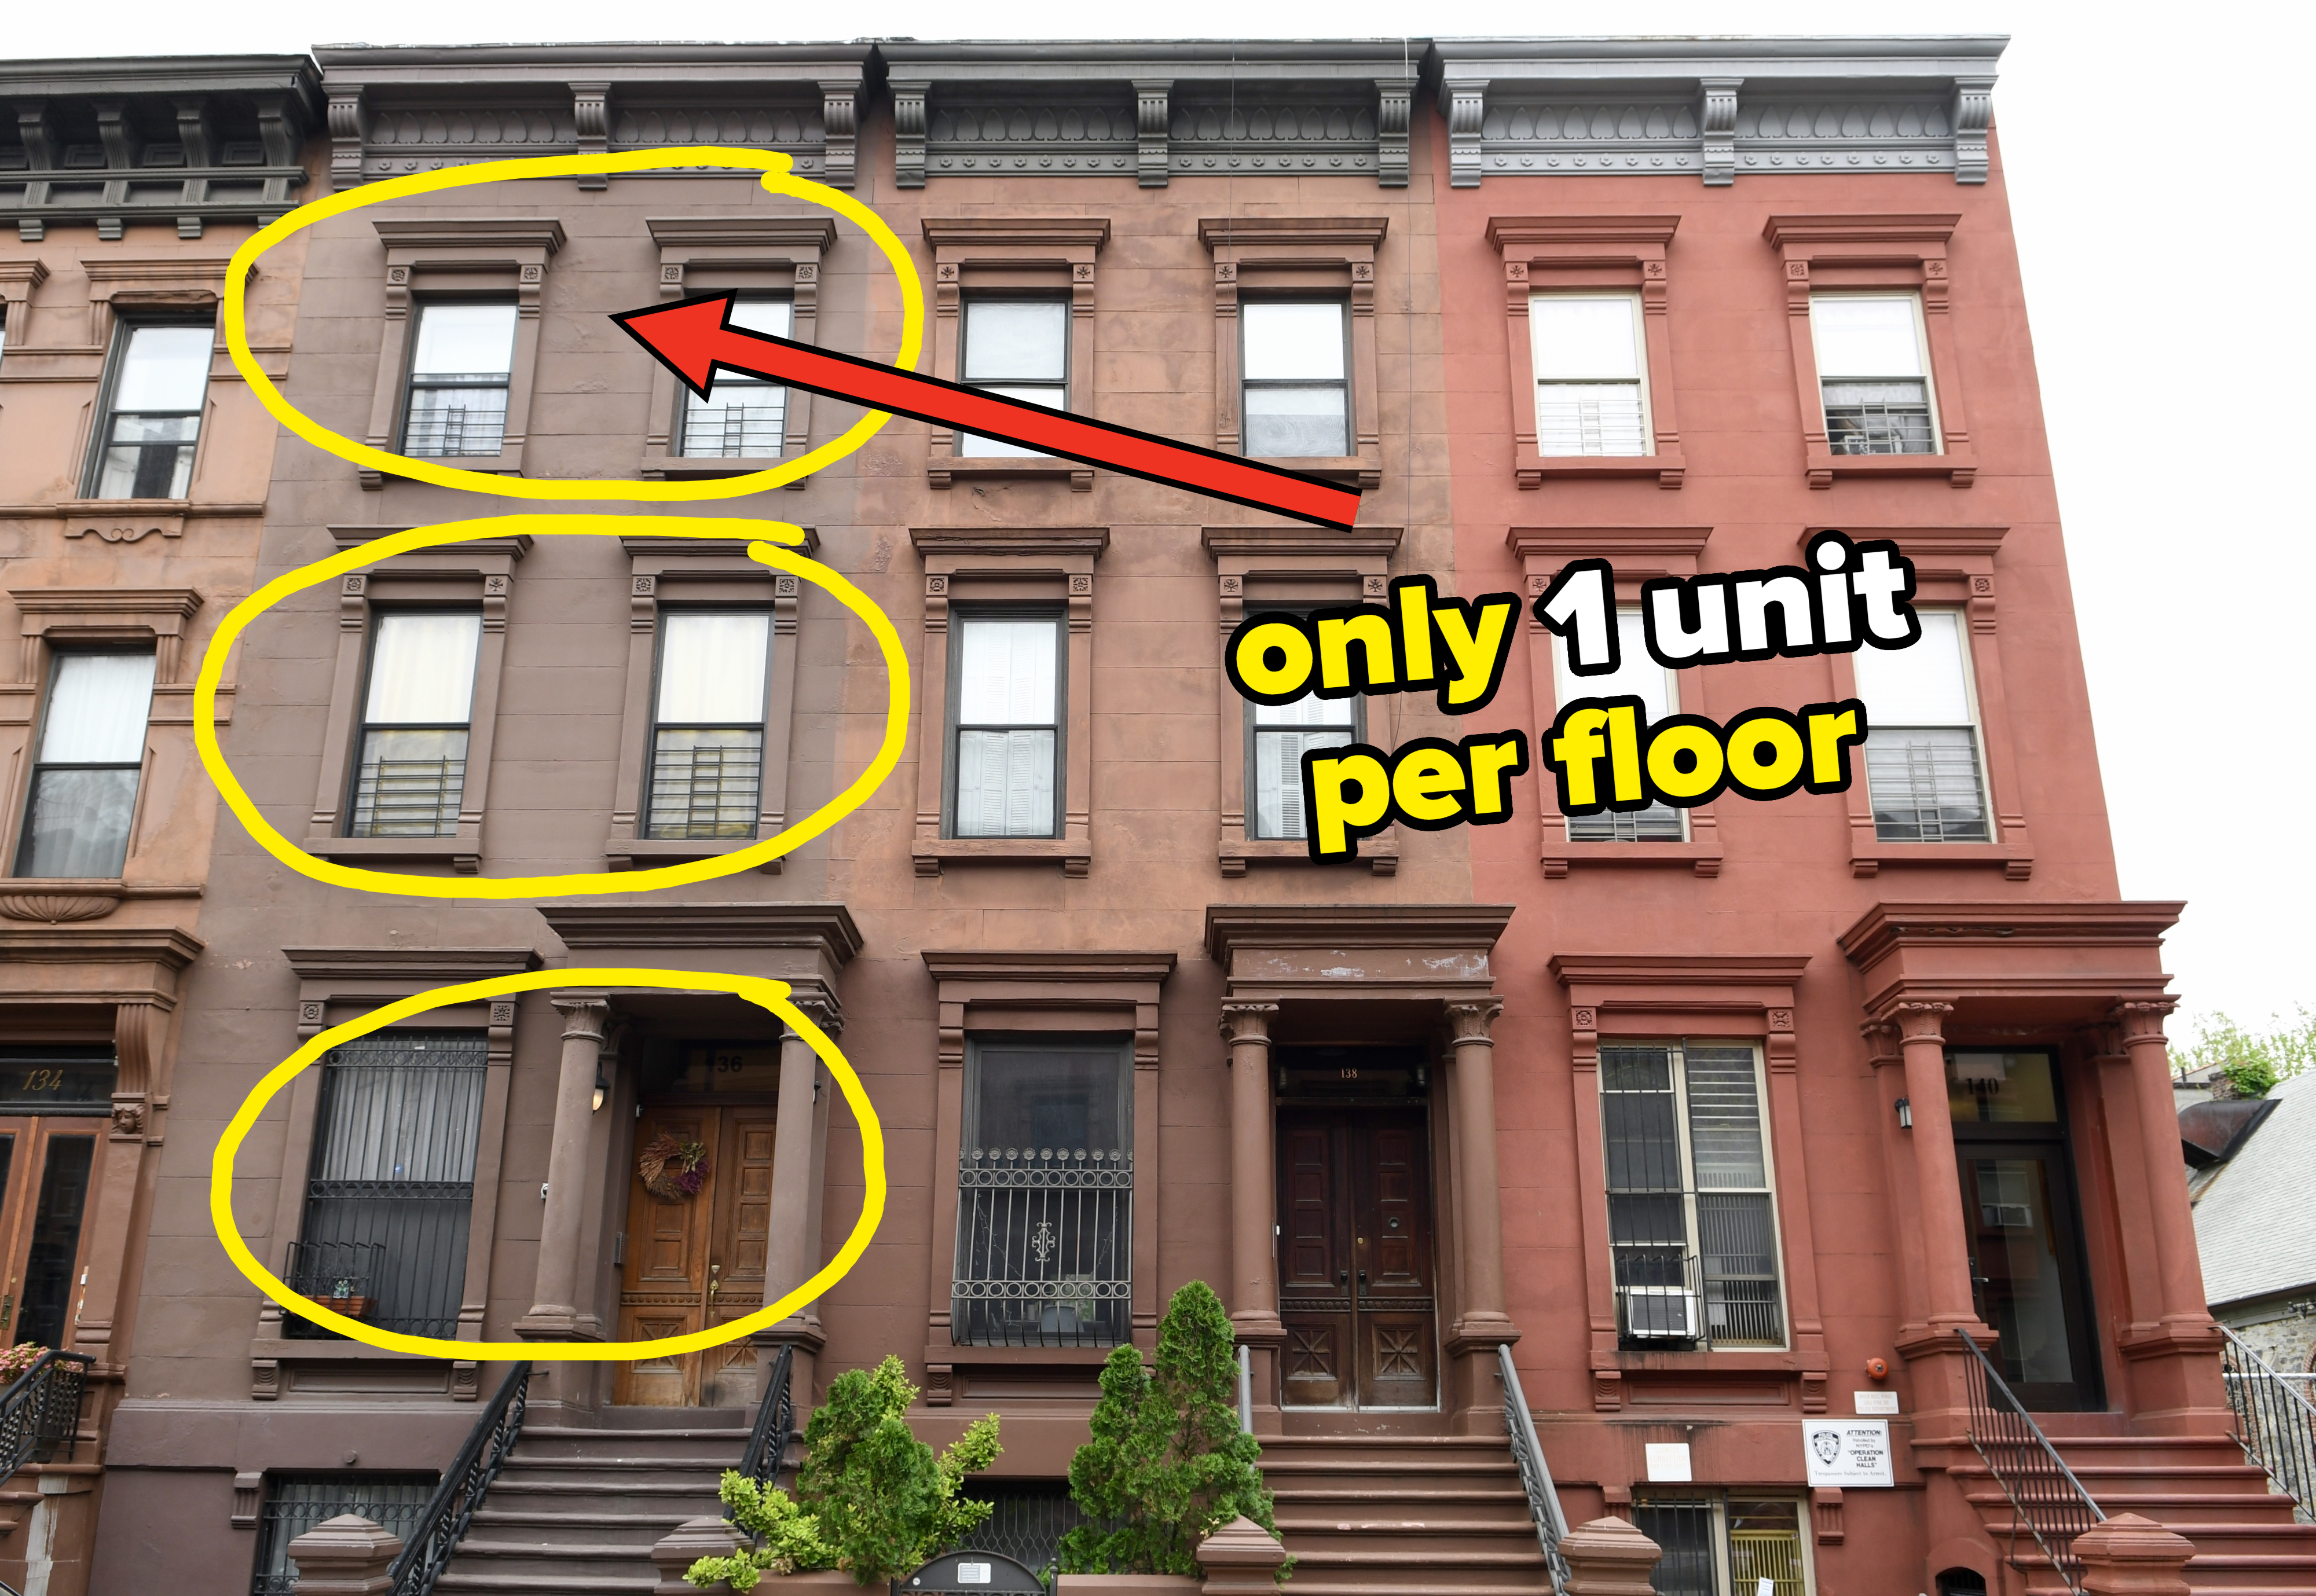 Brownstone buildings, usually with one unit per floor